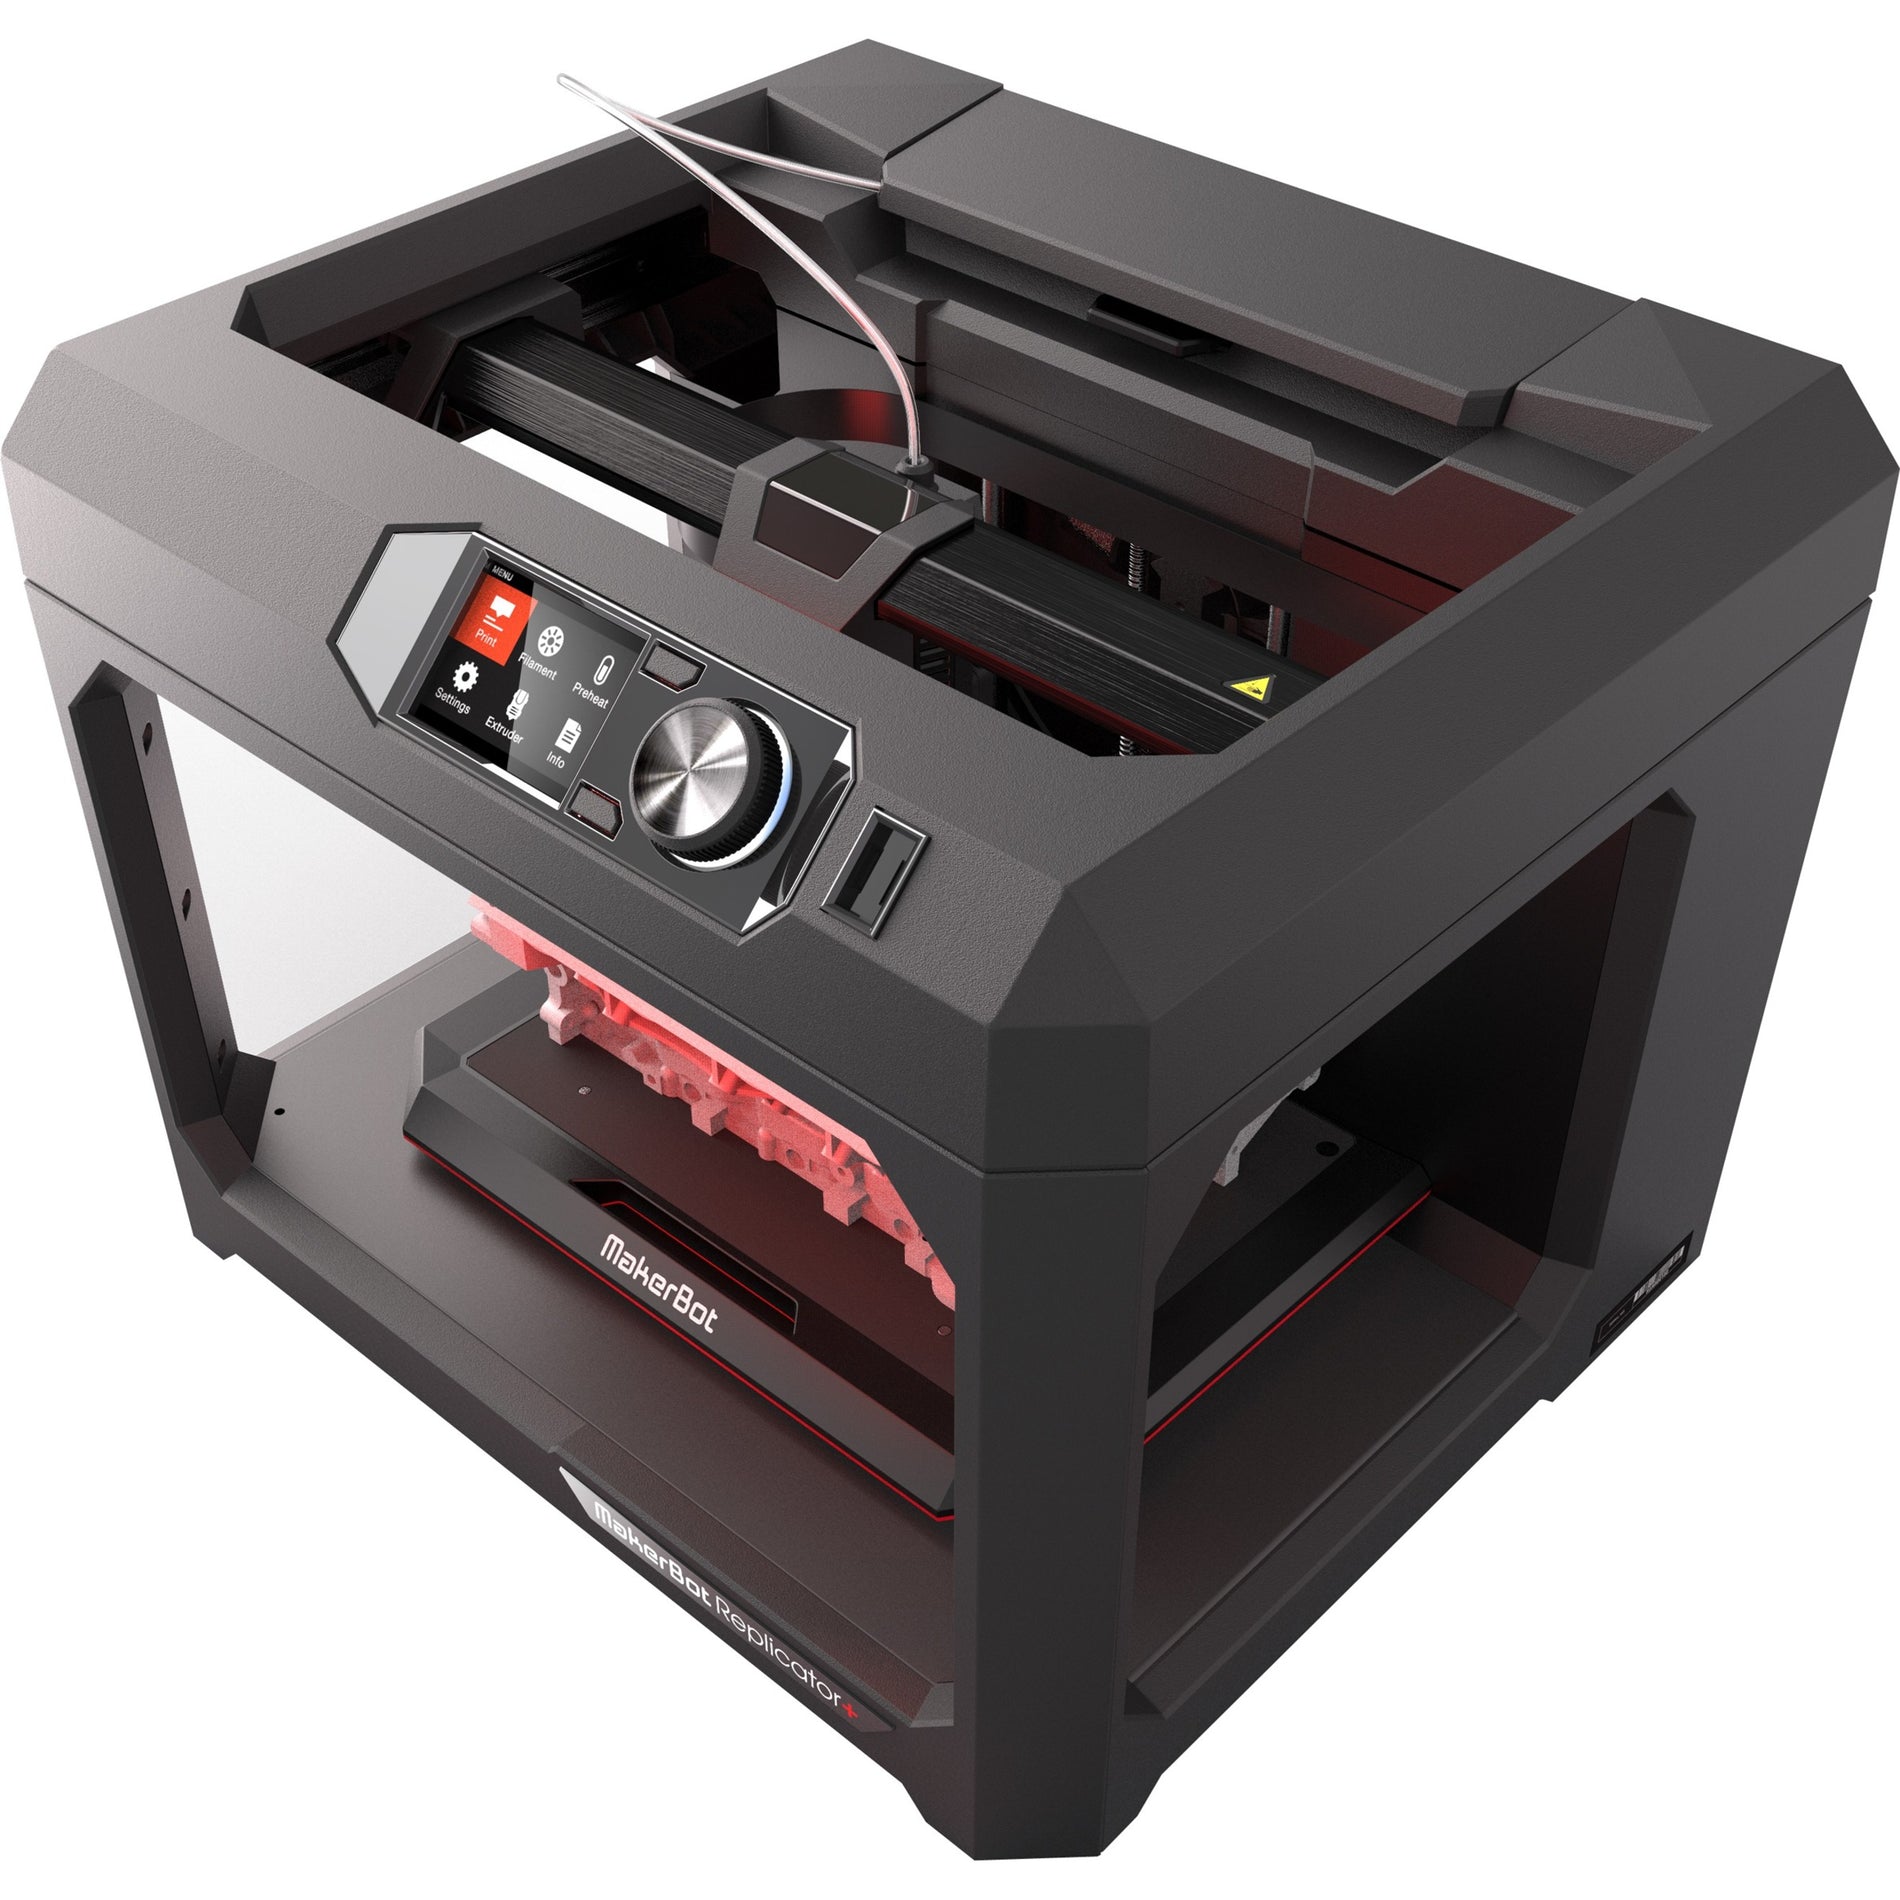 MakerBot Replicator+ 3D Printer - High Precision Printing, Wireless Connectivity [Discontinued]